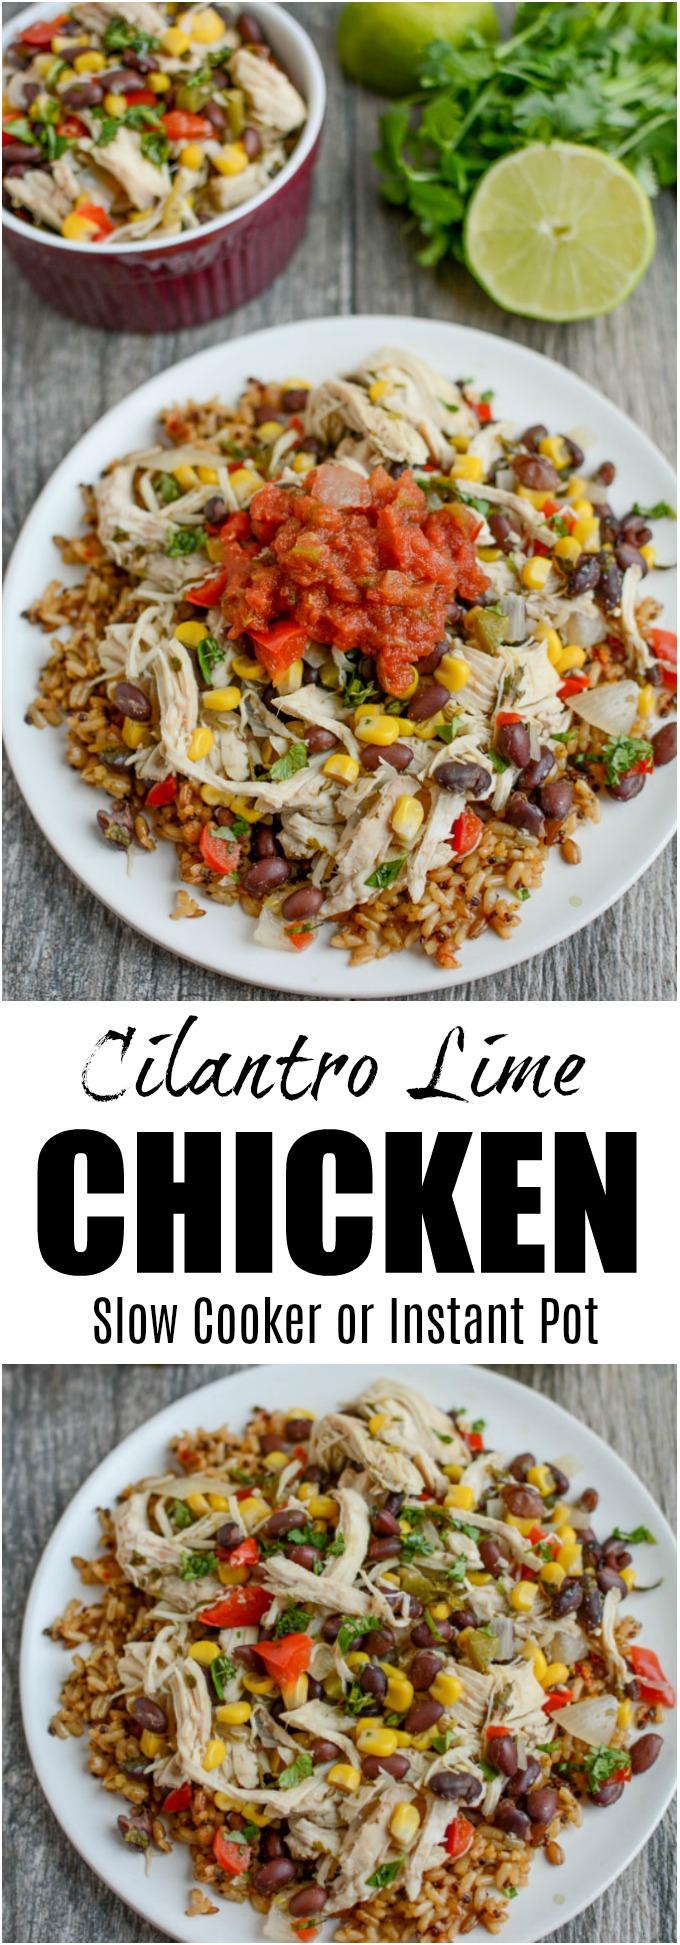 This Cilantro Lime Chicken is the perfect healthy dinner recipe and can be made in the slow cooker or the Instant Pot. Serve it over rice or as a filling for tacos. You can even prep it ahead of time and freeze until you need it.